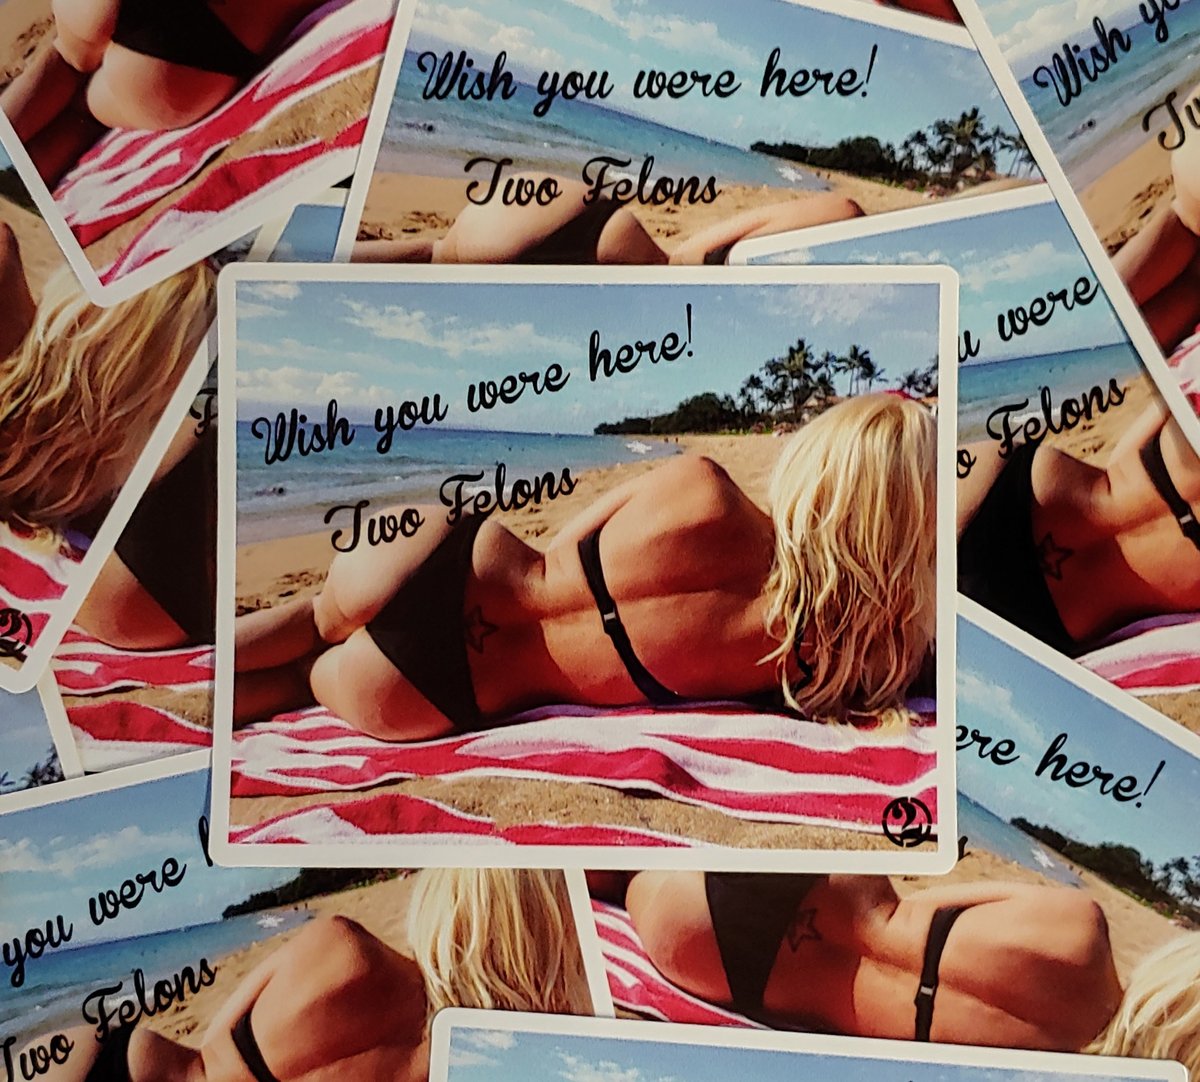  Two Felons "Jane's Vacay" stickers